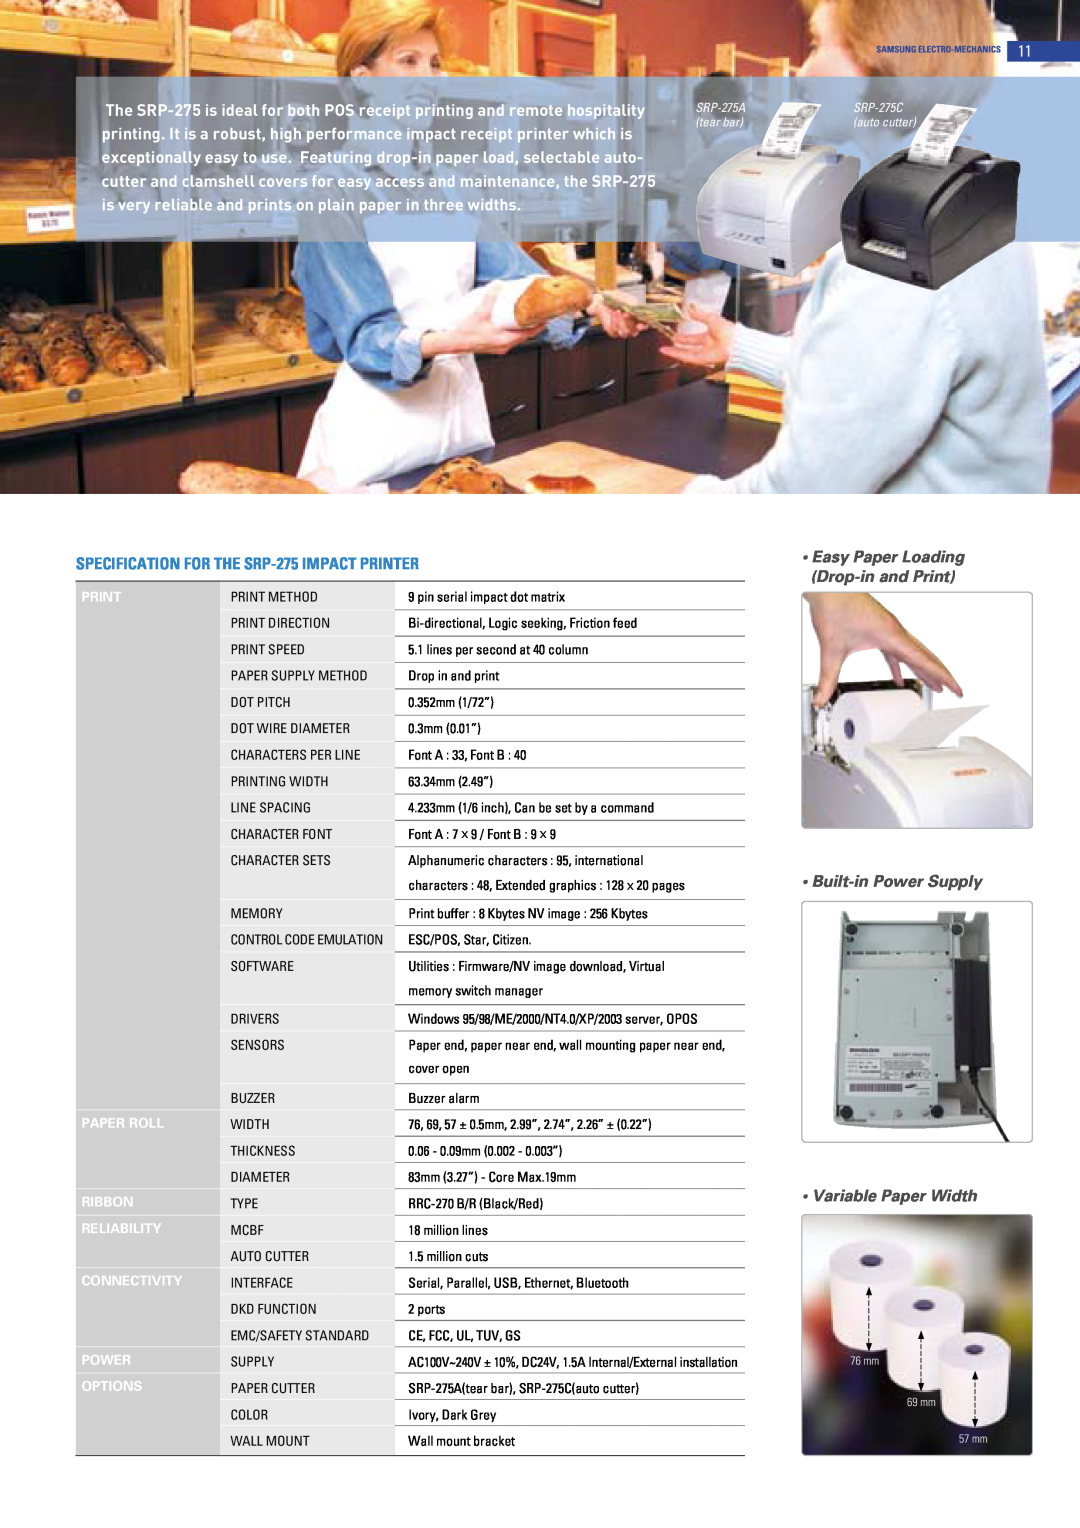 Samsung manual SPECIFICATION FOR THE SRP-275 IMPACT PRINTER, Easy Paper Loading Drop-in and Print Built-in Power Supply 